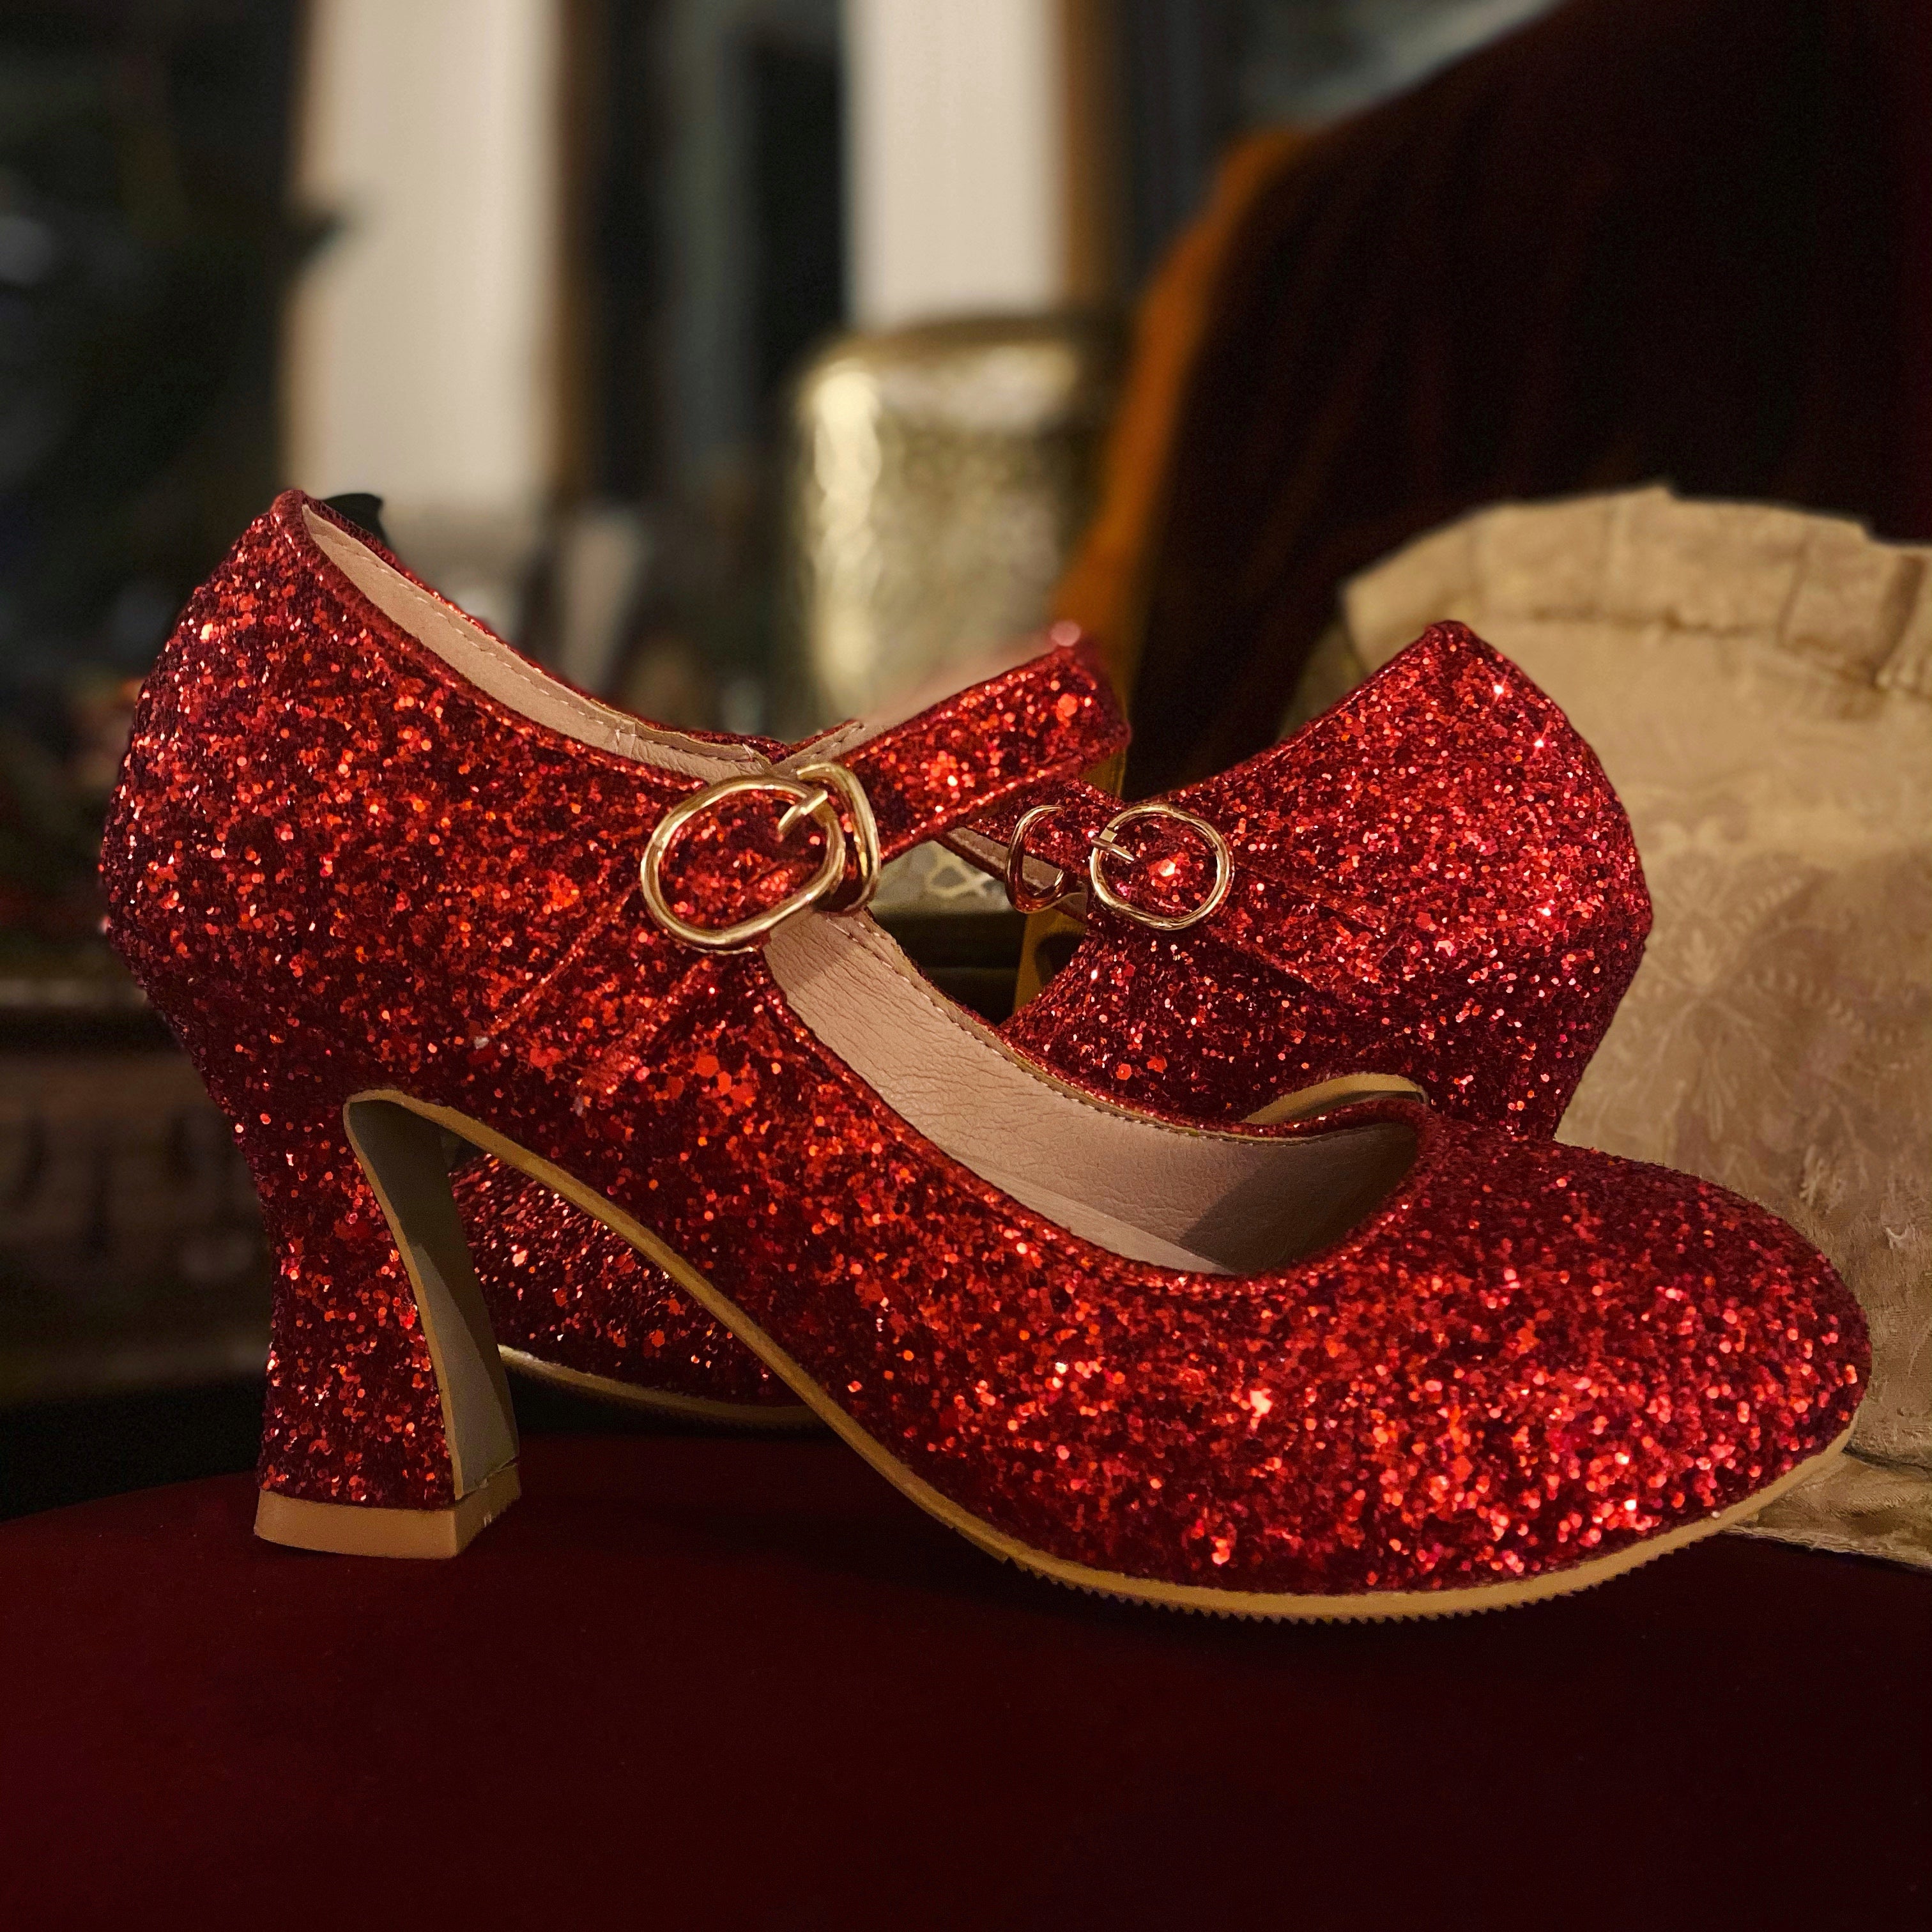 Magical Glittery Dorothy Shoes, Sizes 4-10.5 Red, Silver and Gold